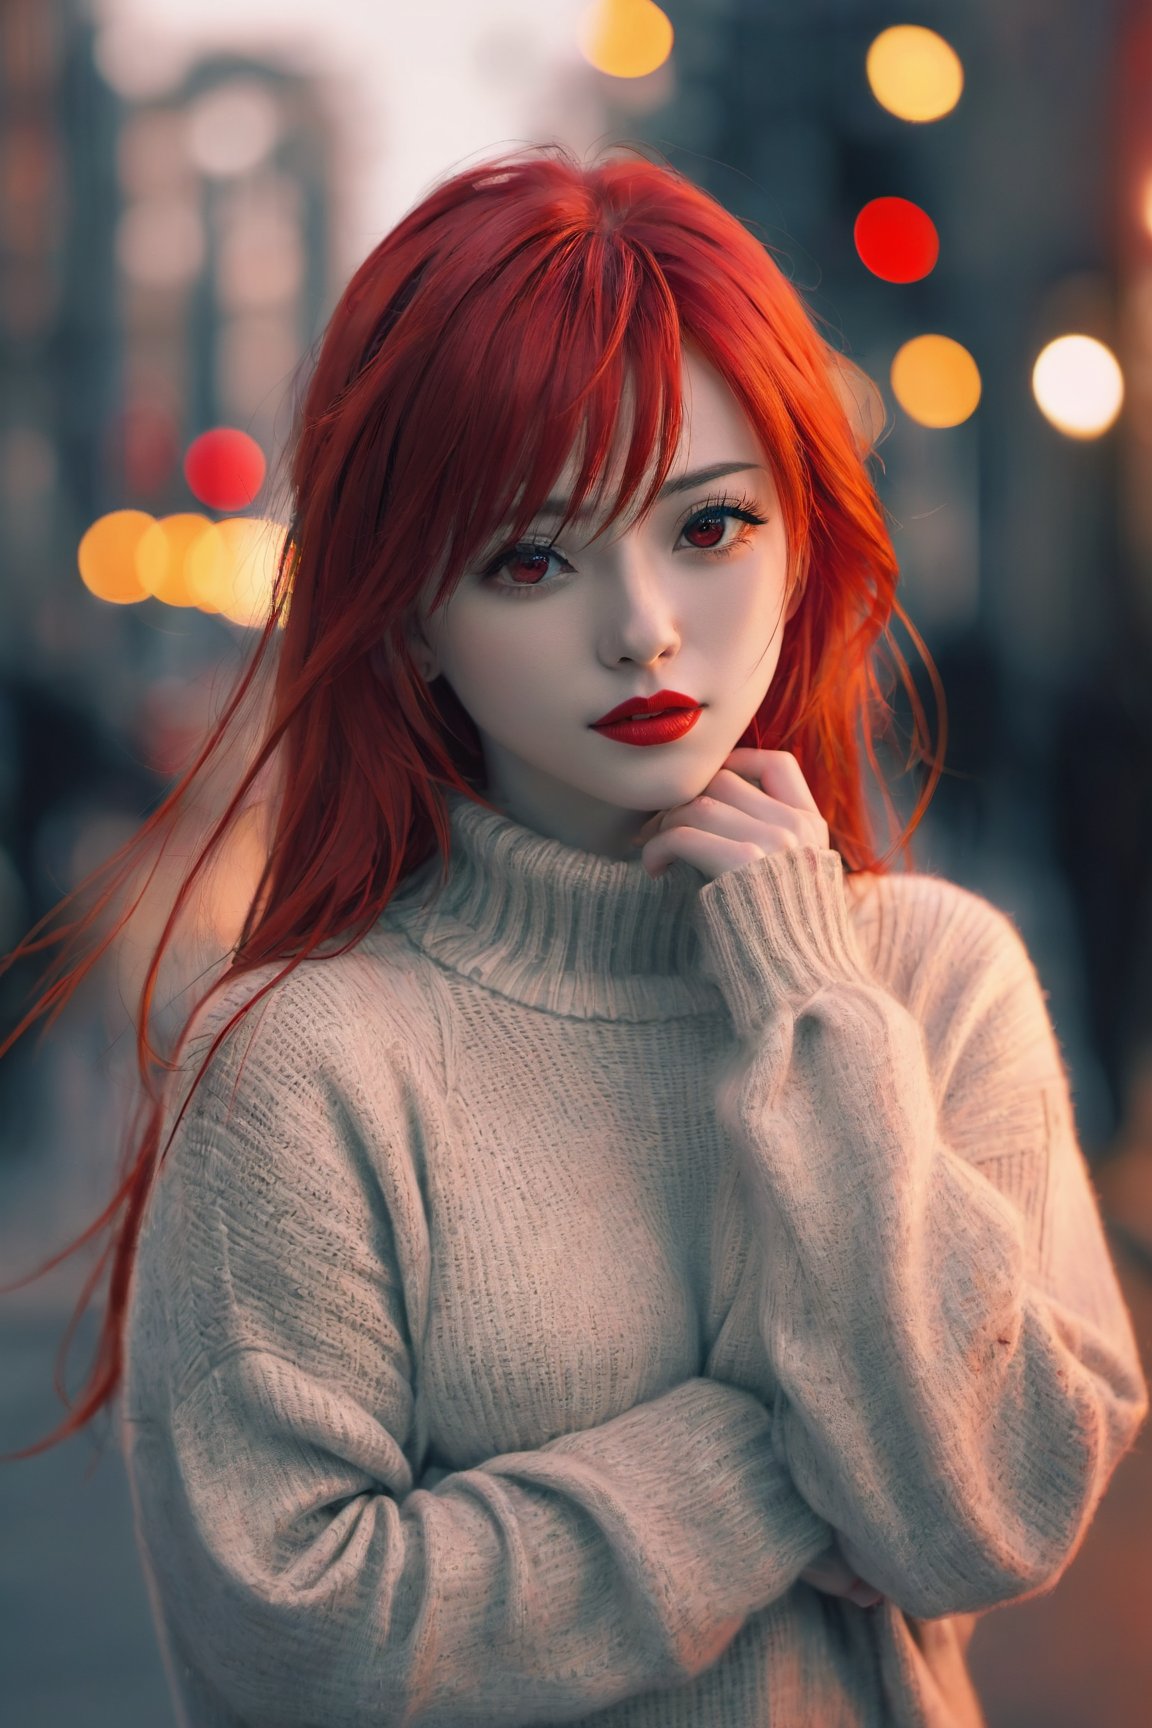 red long hair, a photo of sds,a woman,looking at viewer,red lips,front view,close-up,wearing sweater,cinematic,film grain,bokeh,red neon,bokeh,city street,rim light,dimly lit,DOF,soft lighting, ,ultrasharp,8k,uhd,dslr,masterpiece,extremely sharp, real anime 
